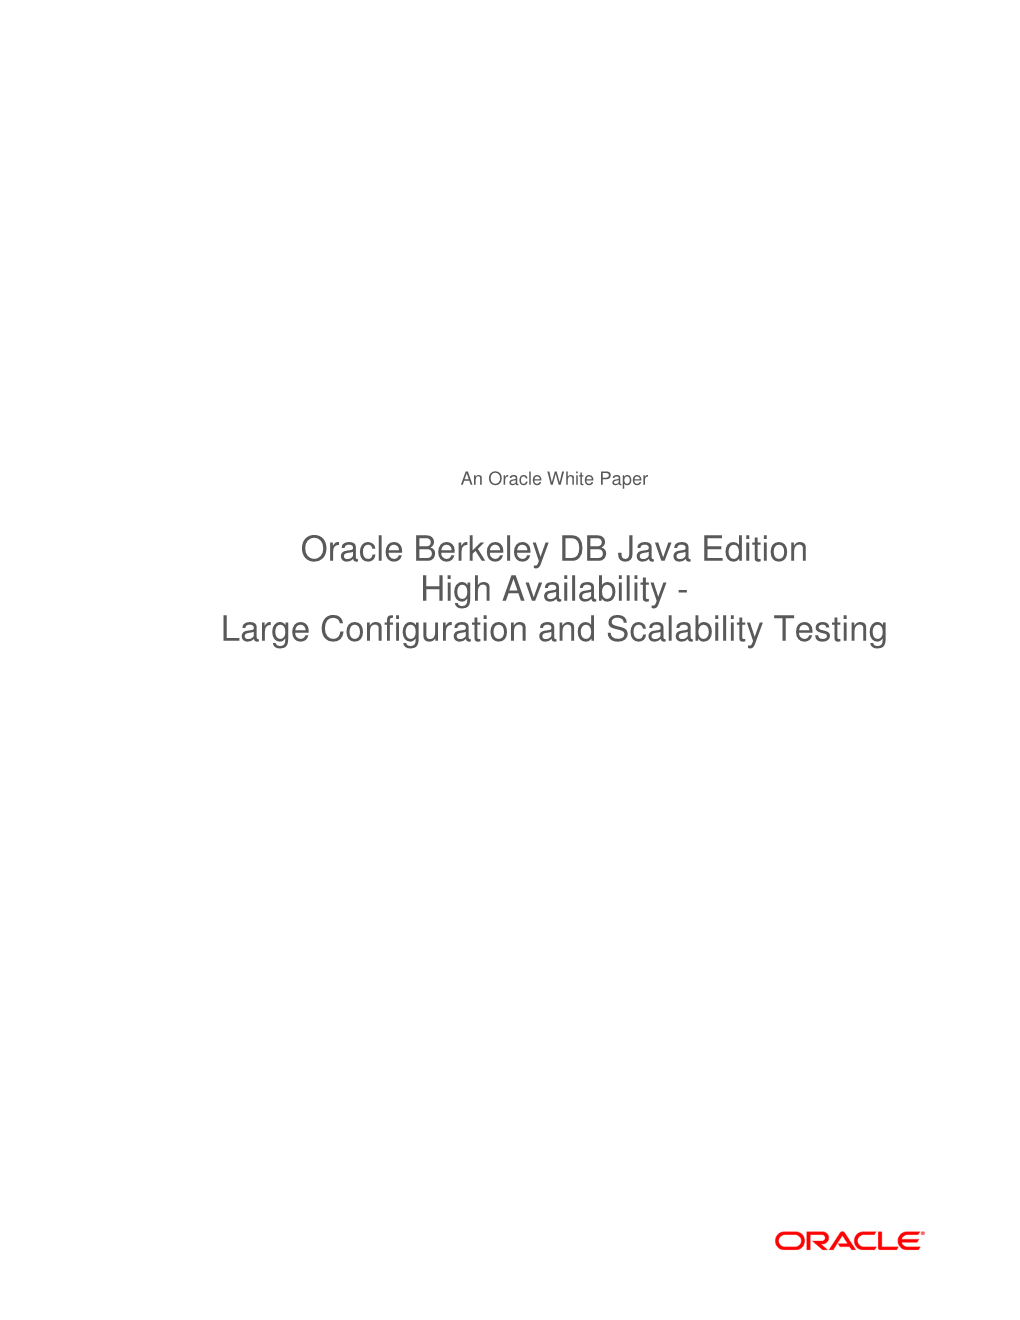 Oracle Berkeley DB Java Edition High Availability - Large Configuration and Scalability Testing